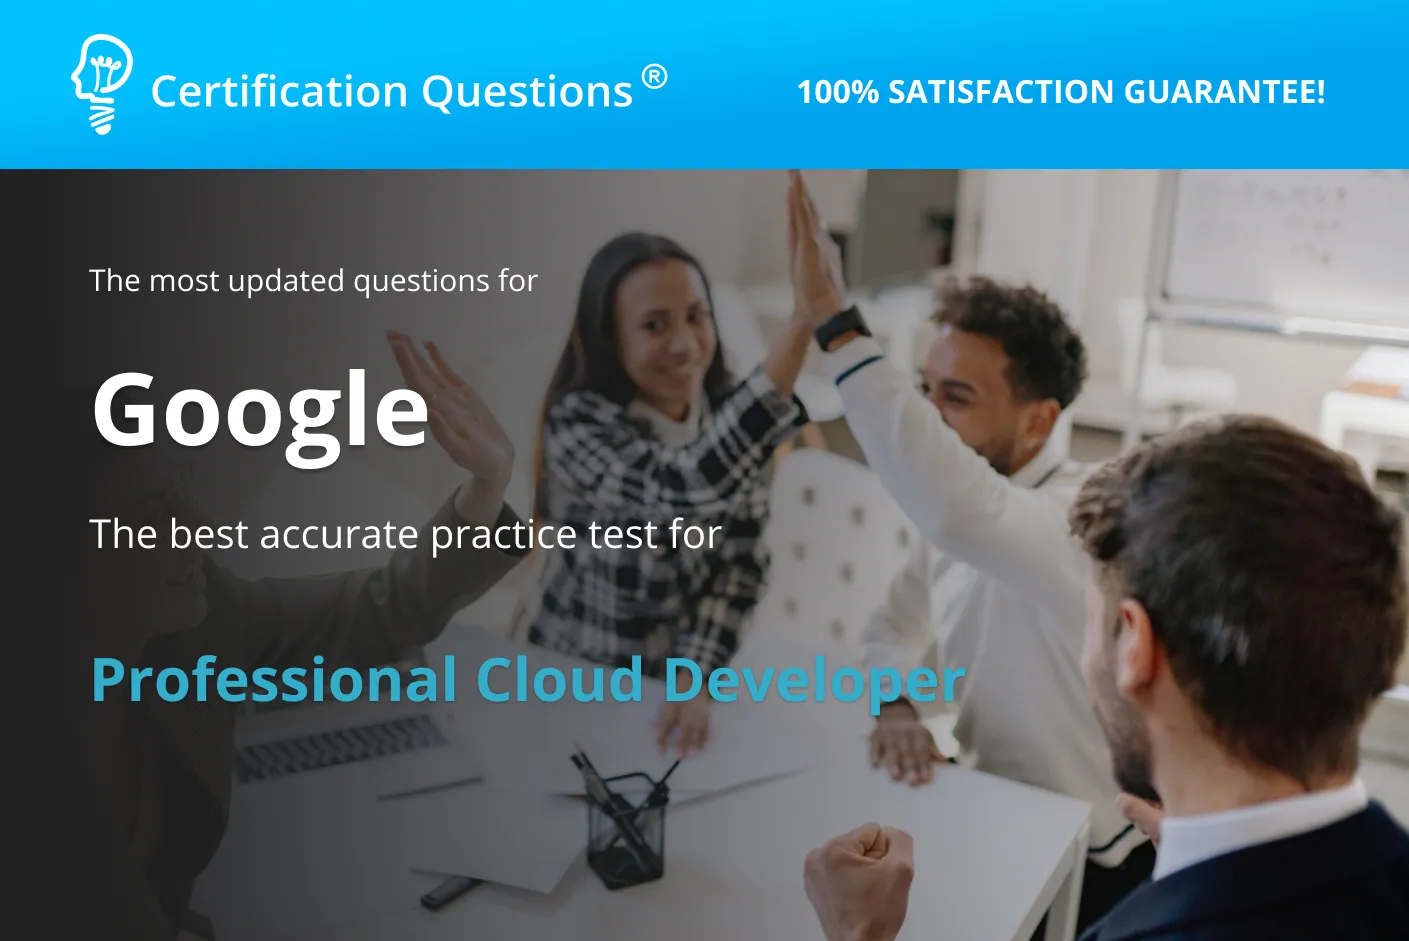 This image is related to the guide of the google cloud developer certification.